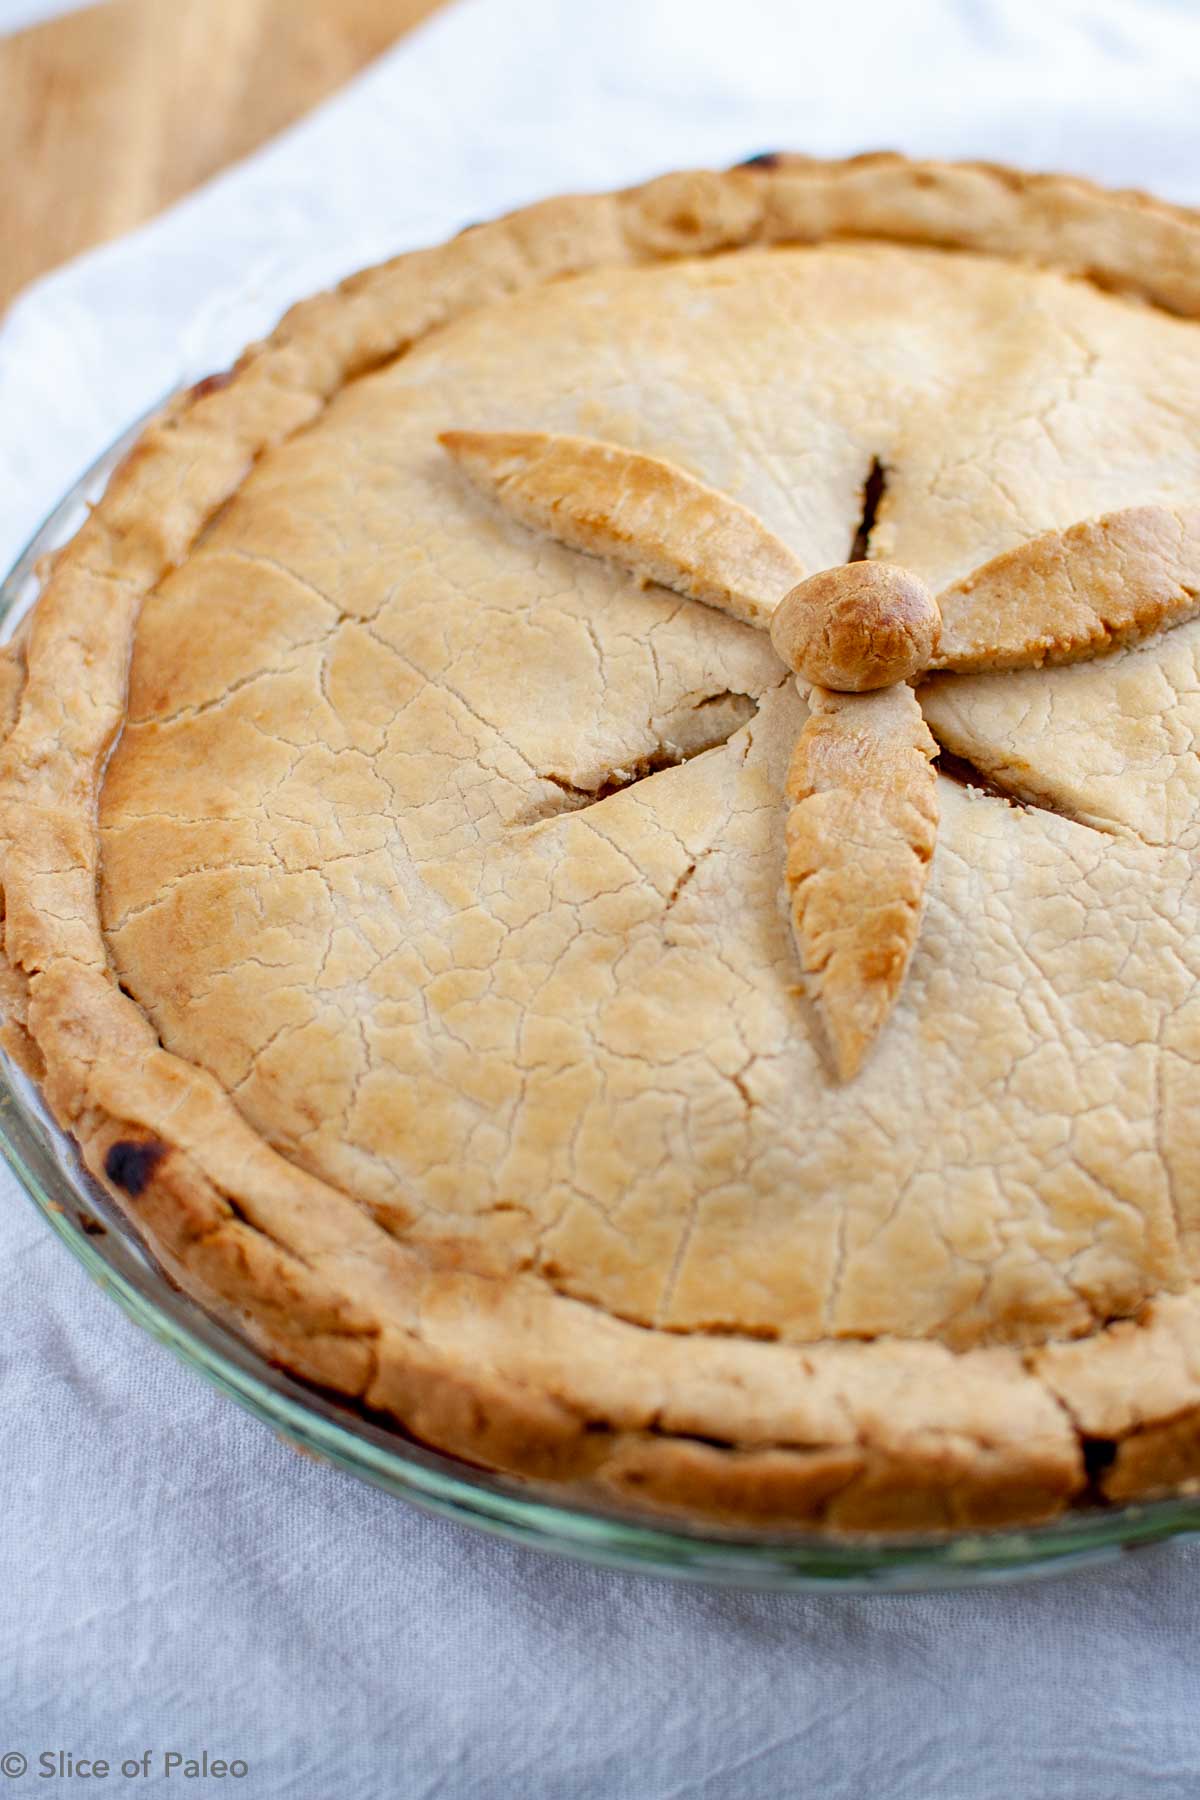 Fruit Sweetened Paleo Apple Pie with browned top crust